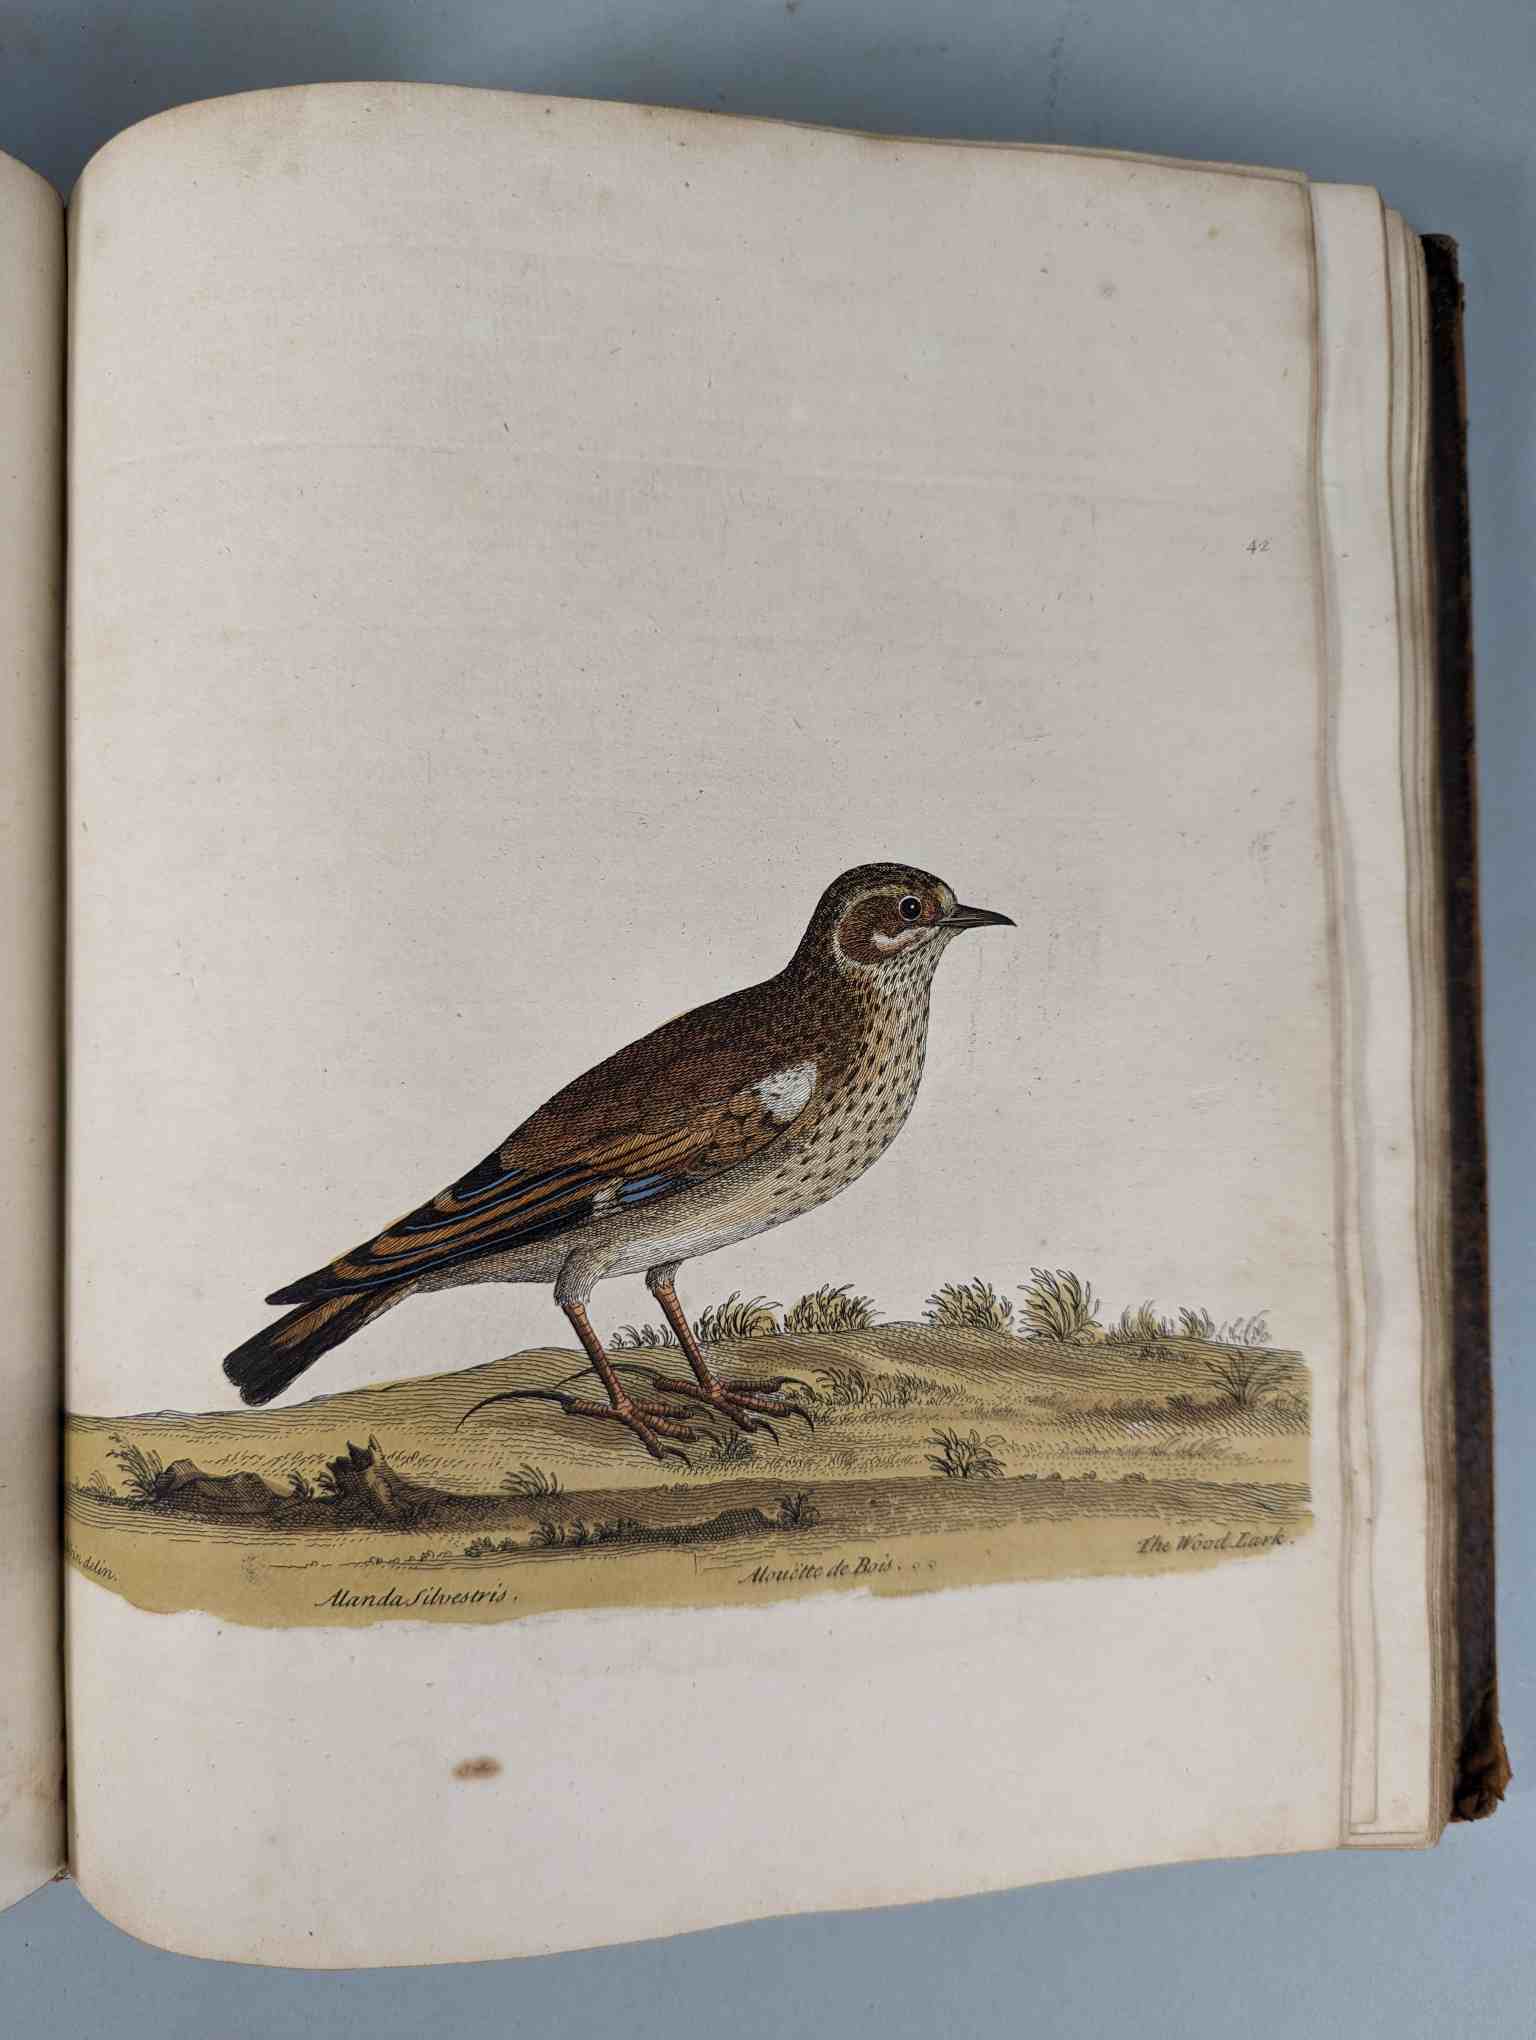 ALBIN, Eleazar. A Natural History of Birds, to which are added, Notes and Observations by W. - Image 45 of 208